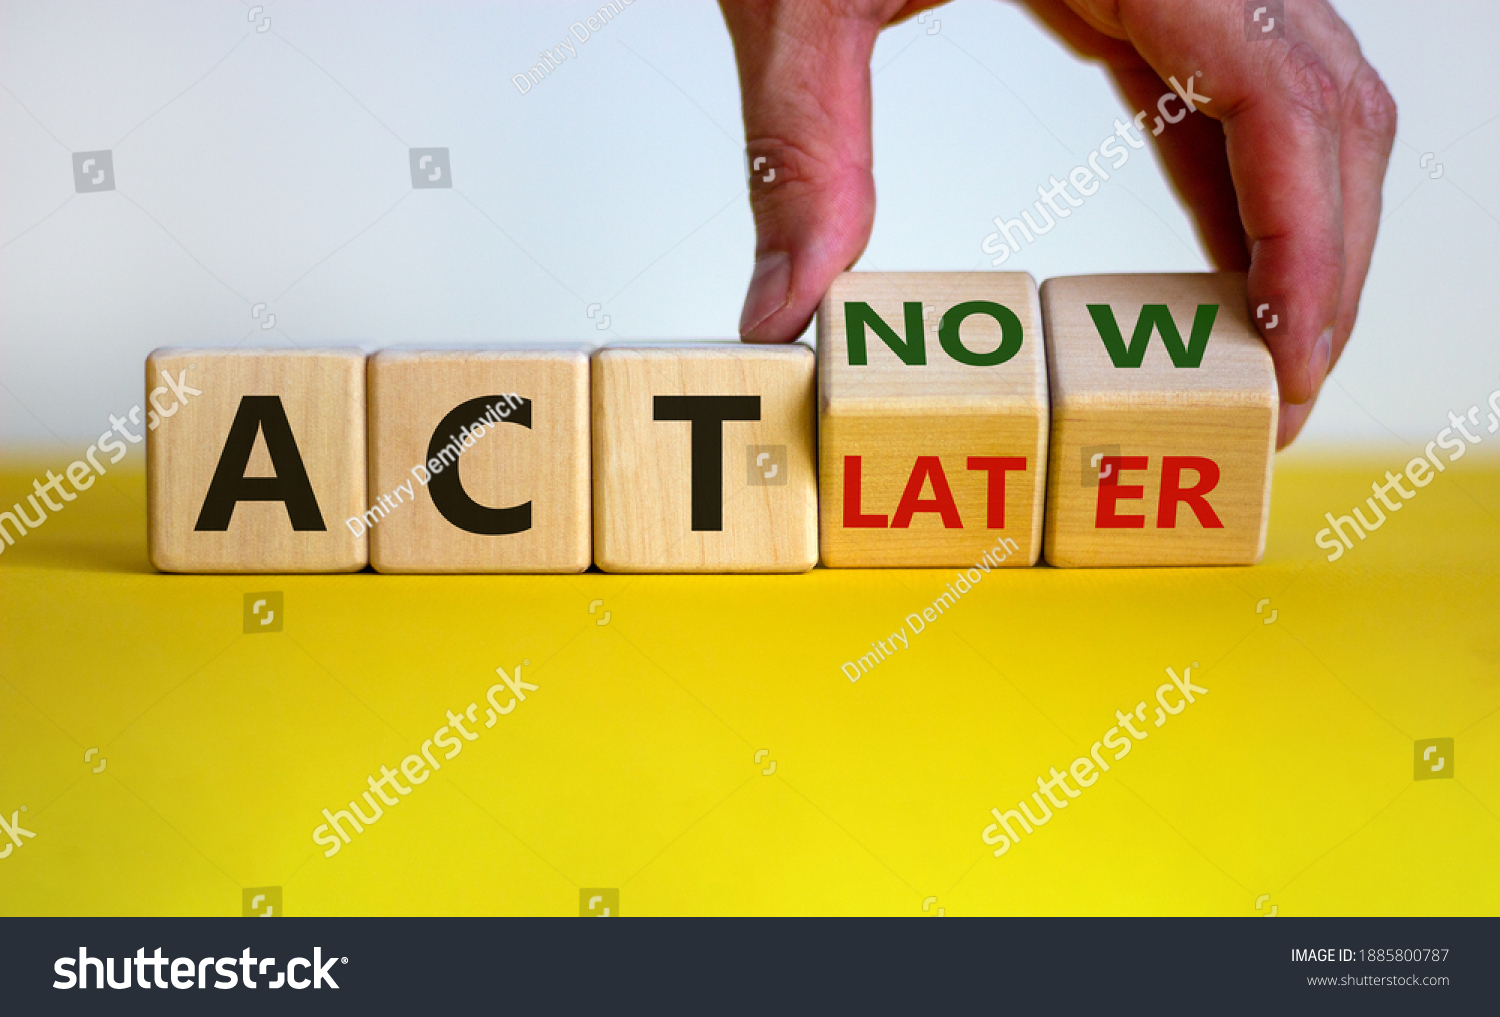 Act now, not later symbol. Male hand turns wooden cubes and changes words 'act later' to 'act now'. Business and act now or later concept. Beautiful yellow table, white background, copy space. #1885800787